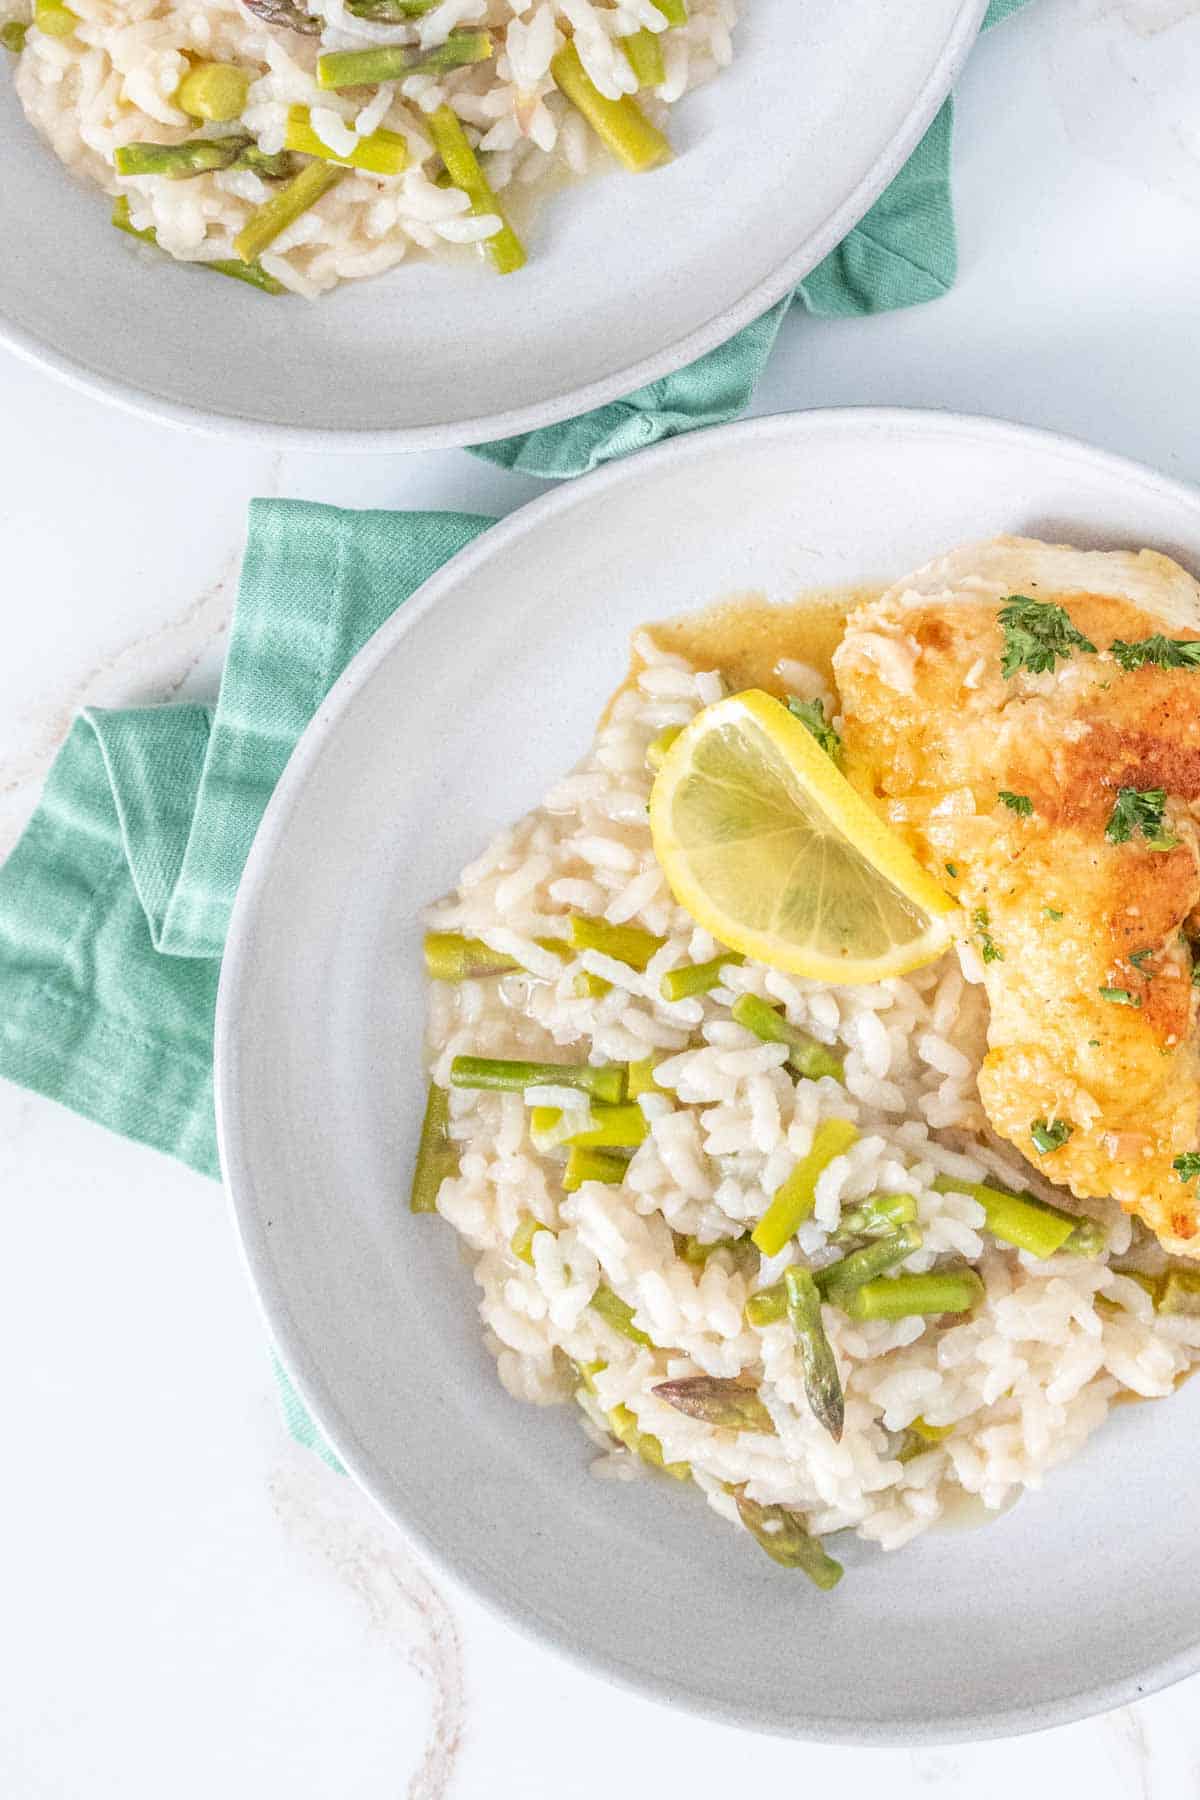 Asparagus risotto on plates with chicken.